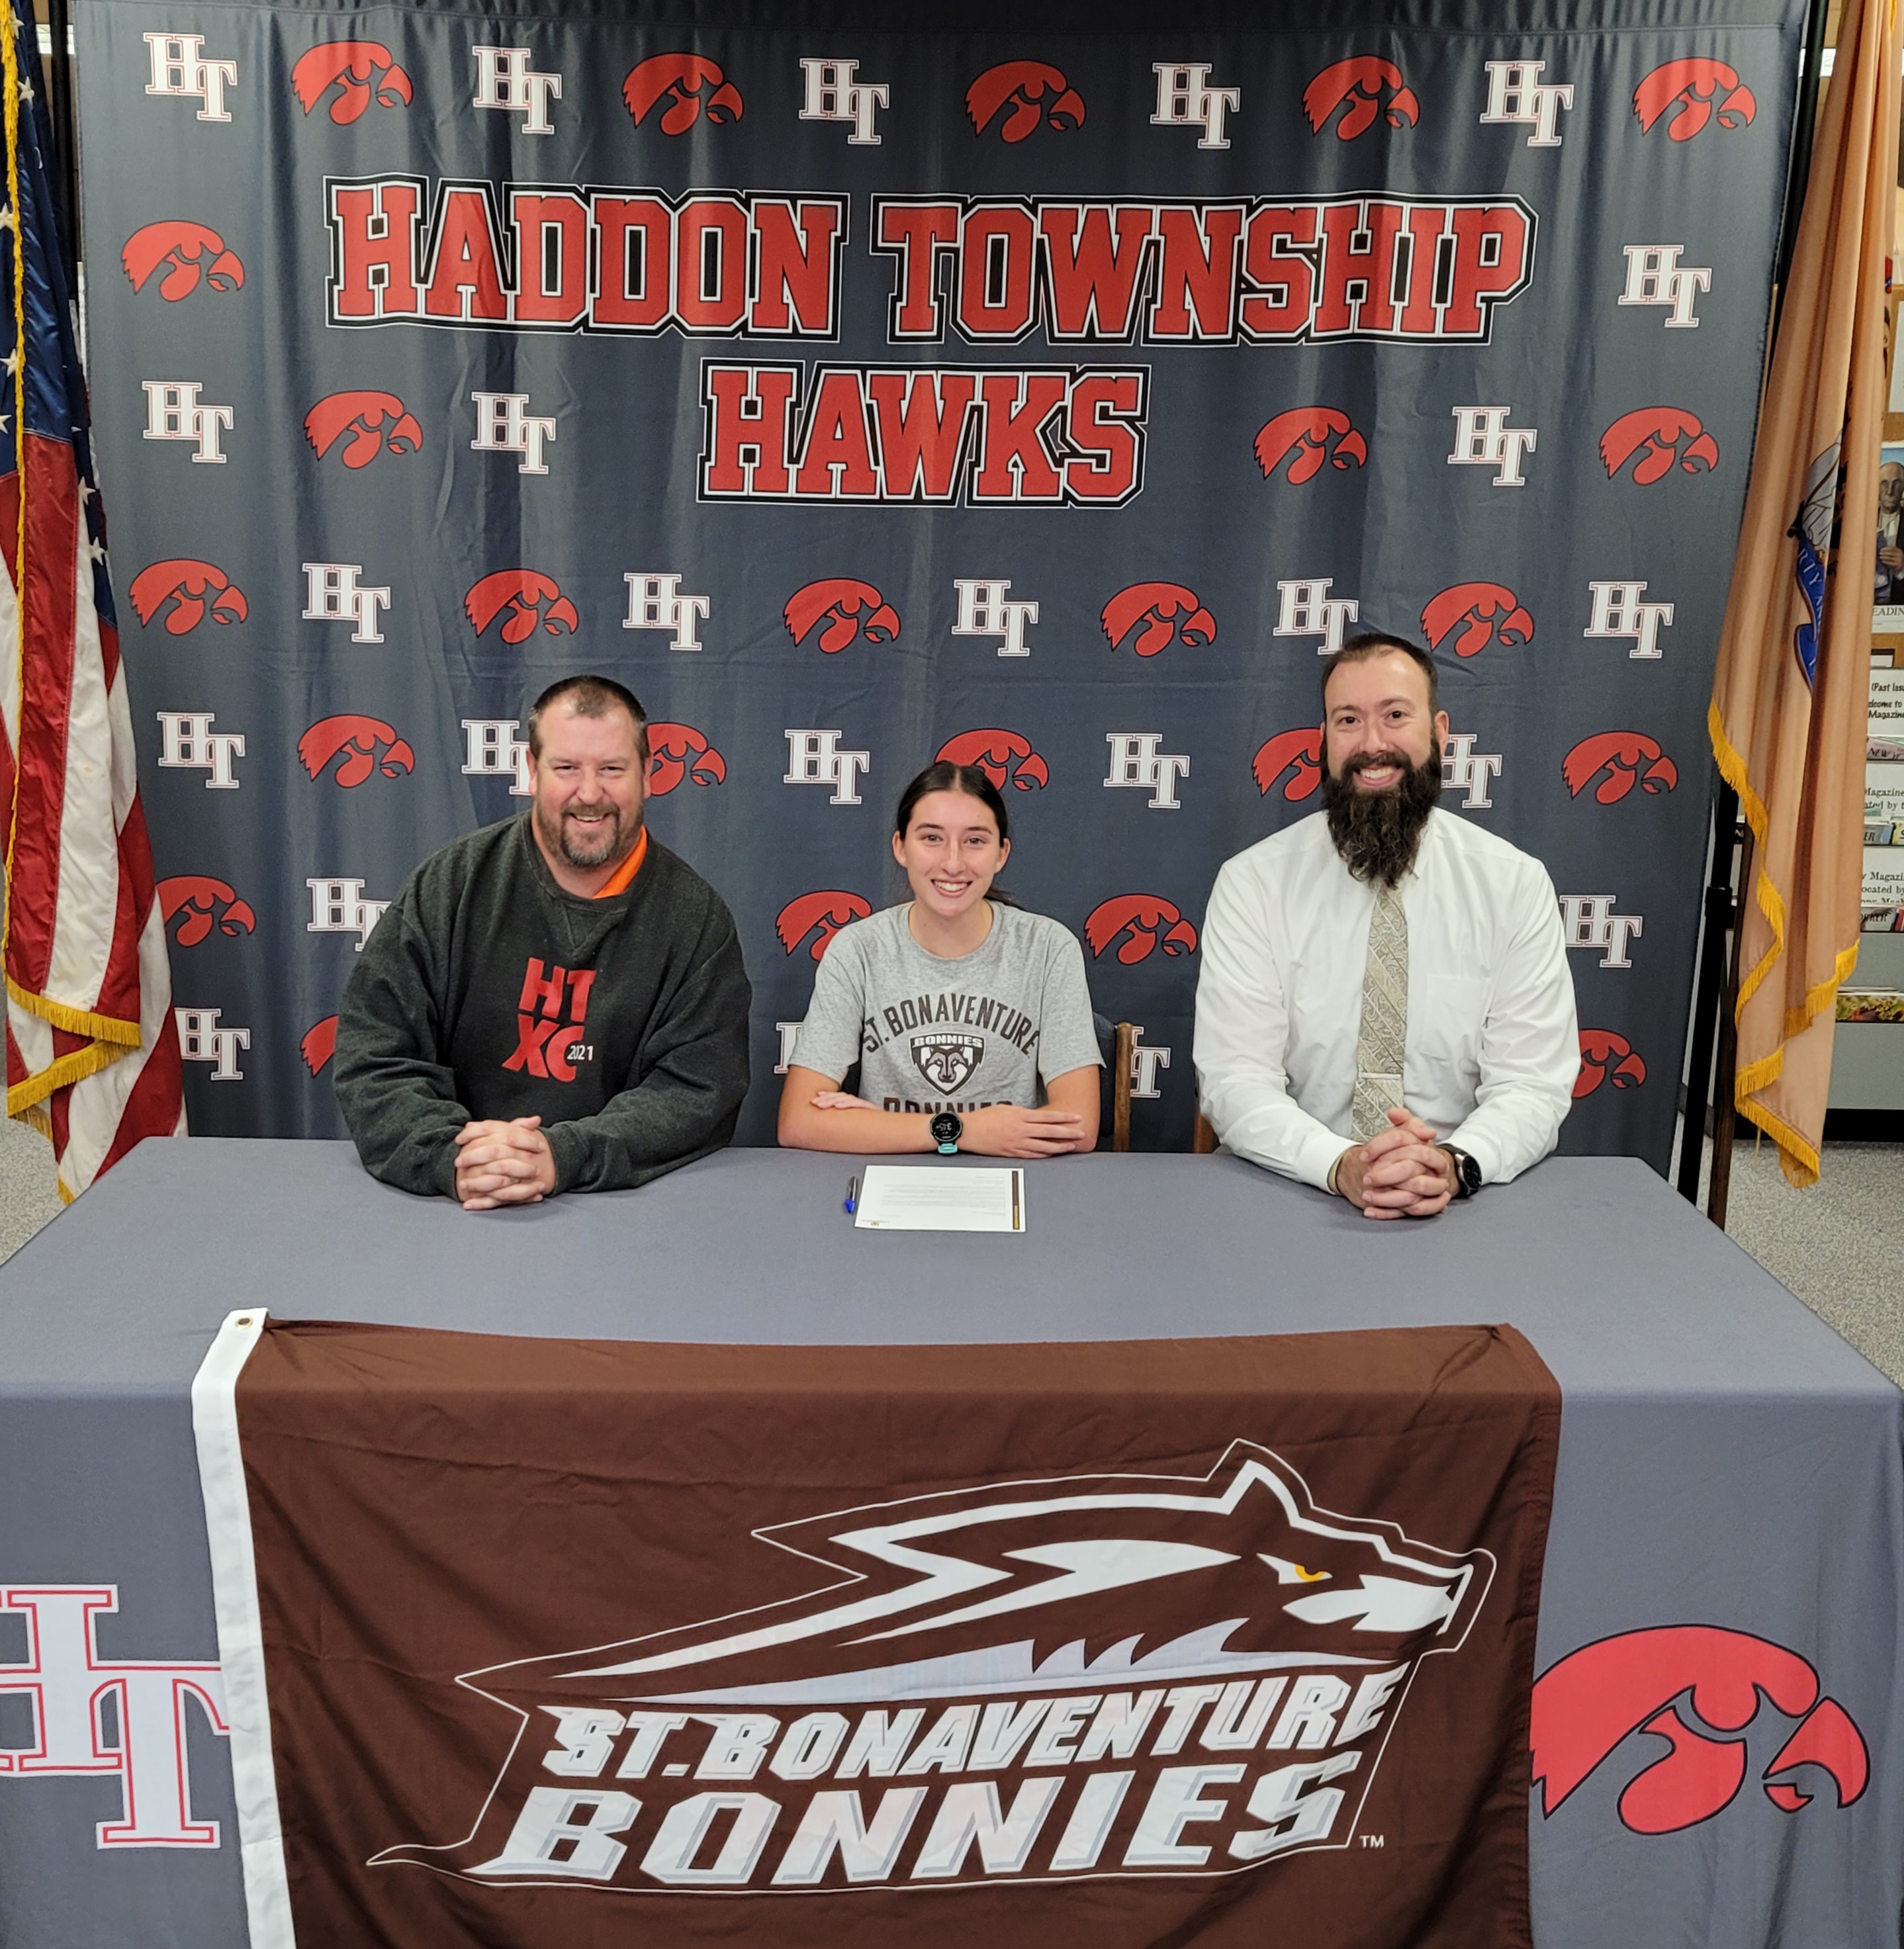 Coach Jim Younglove, Meghan Lex, Assistant Principal Kevin Greway.
Meghan Lex has signed a NLI to run cross country at St Bonaventure.